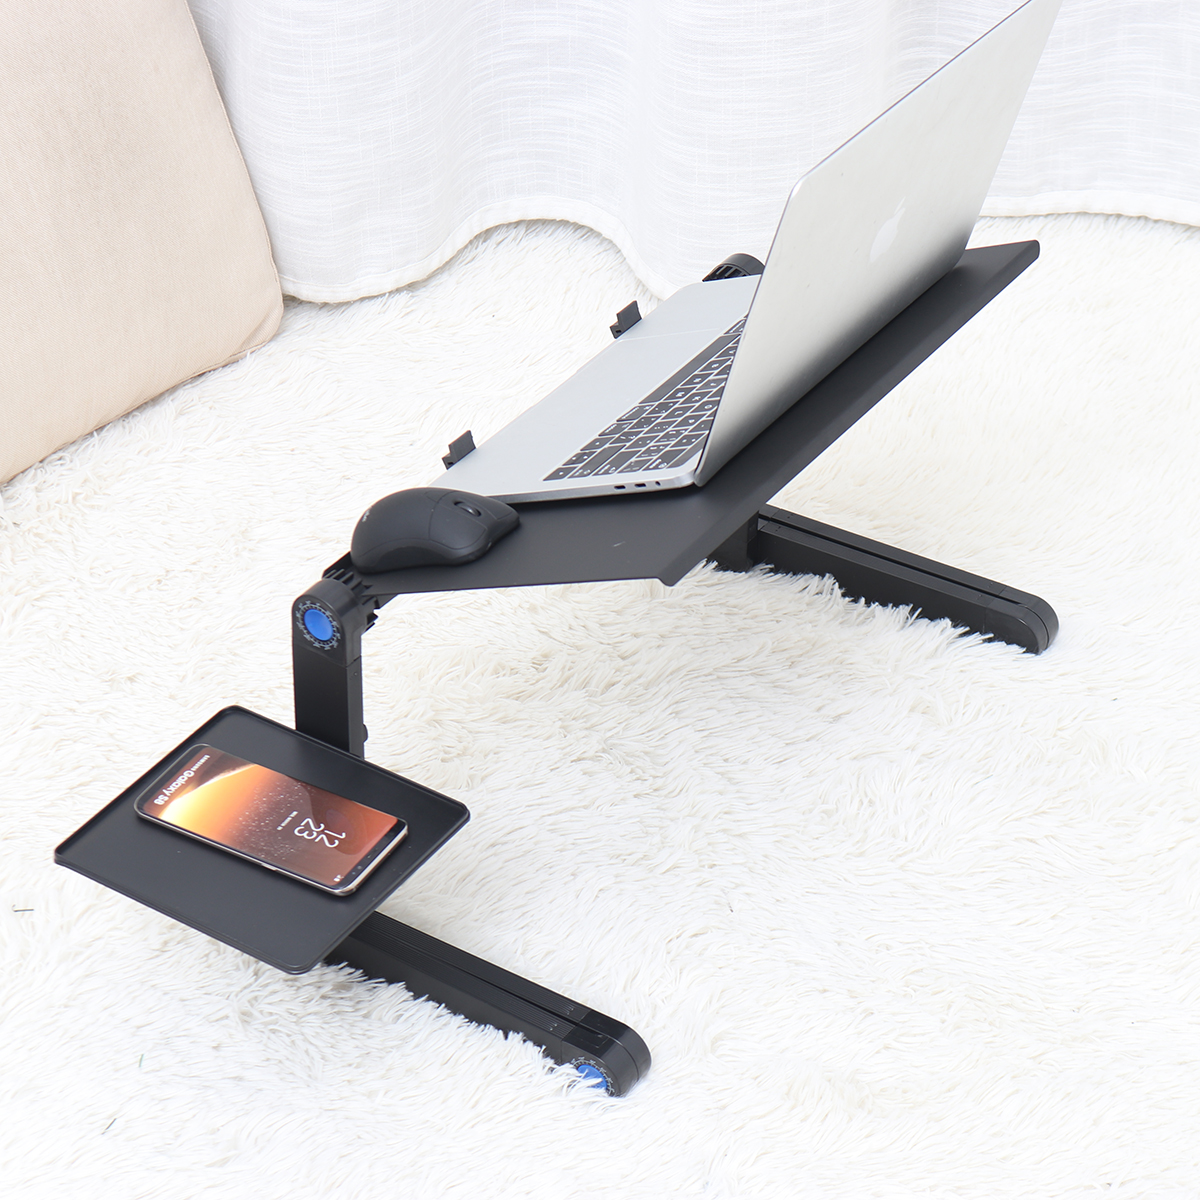 Laptop-Desk-Aluminum-Alloy-Folding-Computer-Notebook-Desk-Bed-Laptop-Table-with-Cooling-Stand-and-Mo-1746373-8